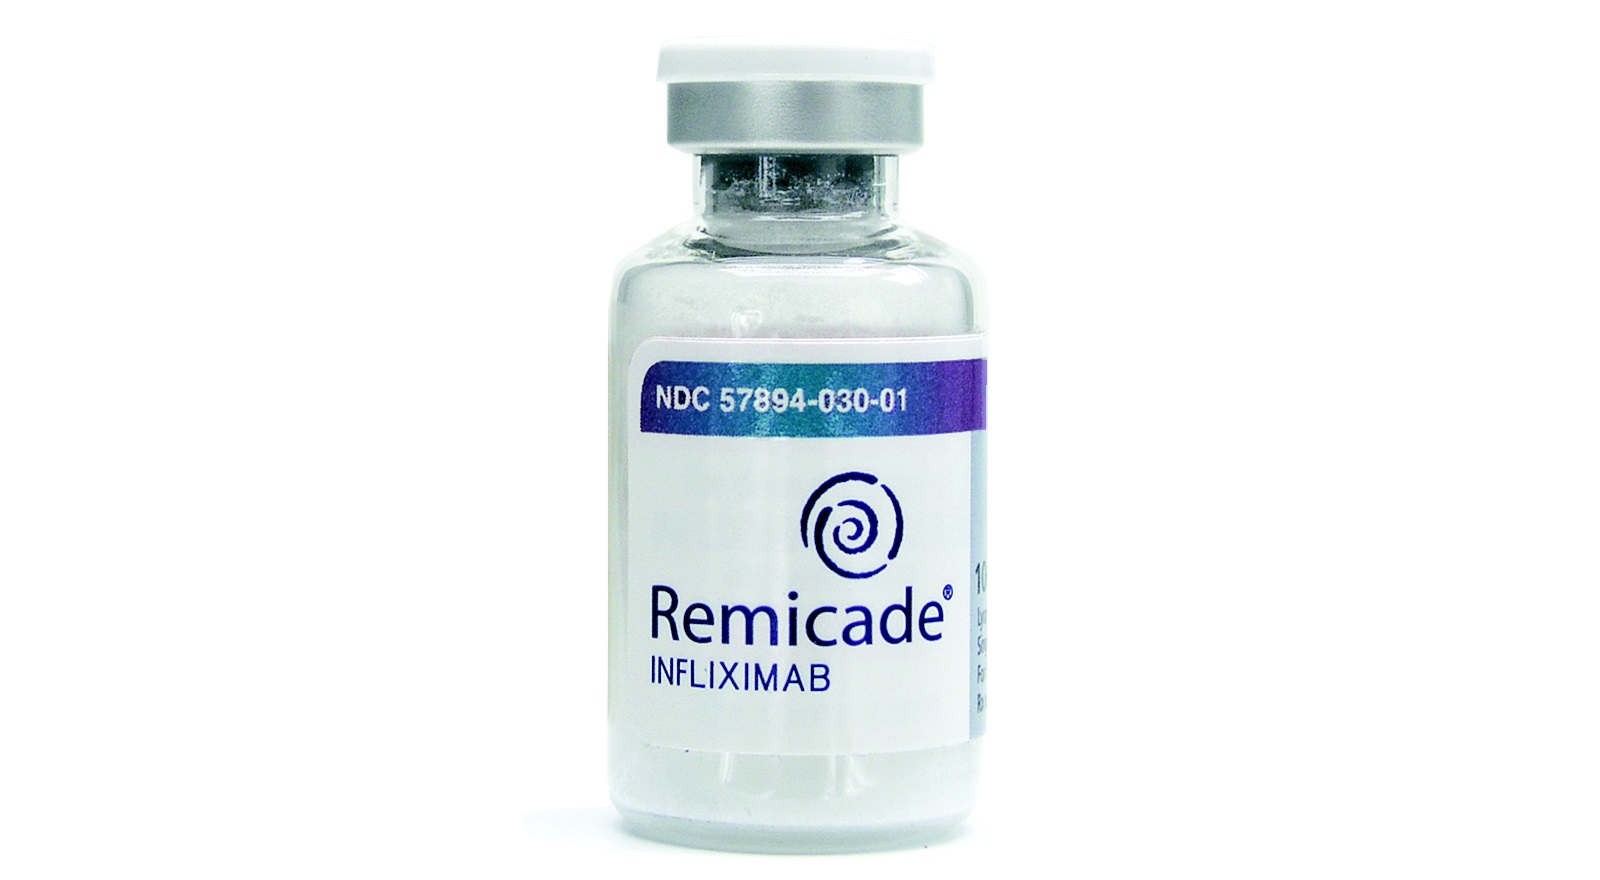 With support of FDA committee, Remicade biosimilar edges closer to market